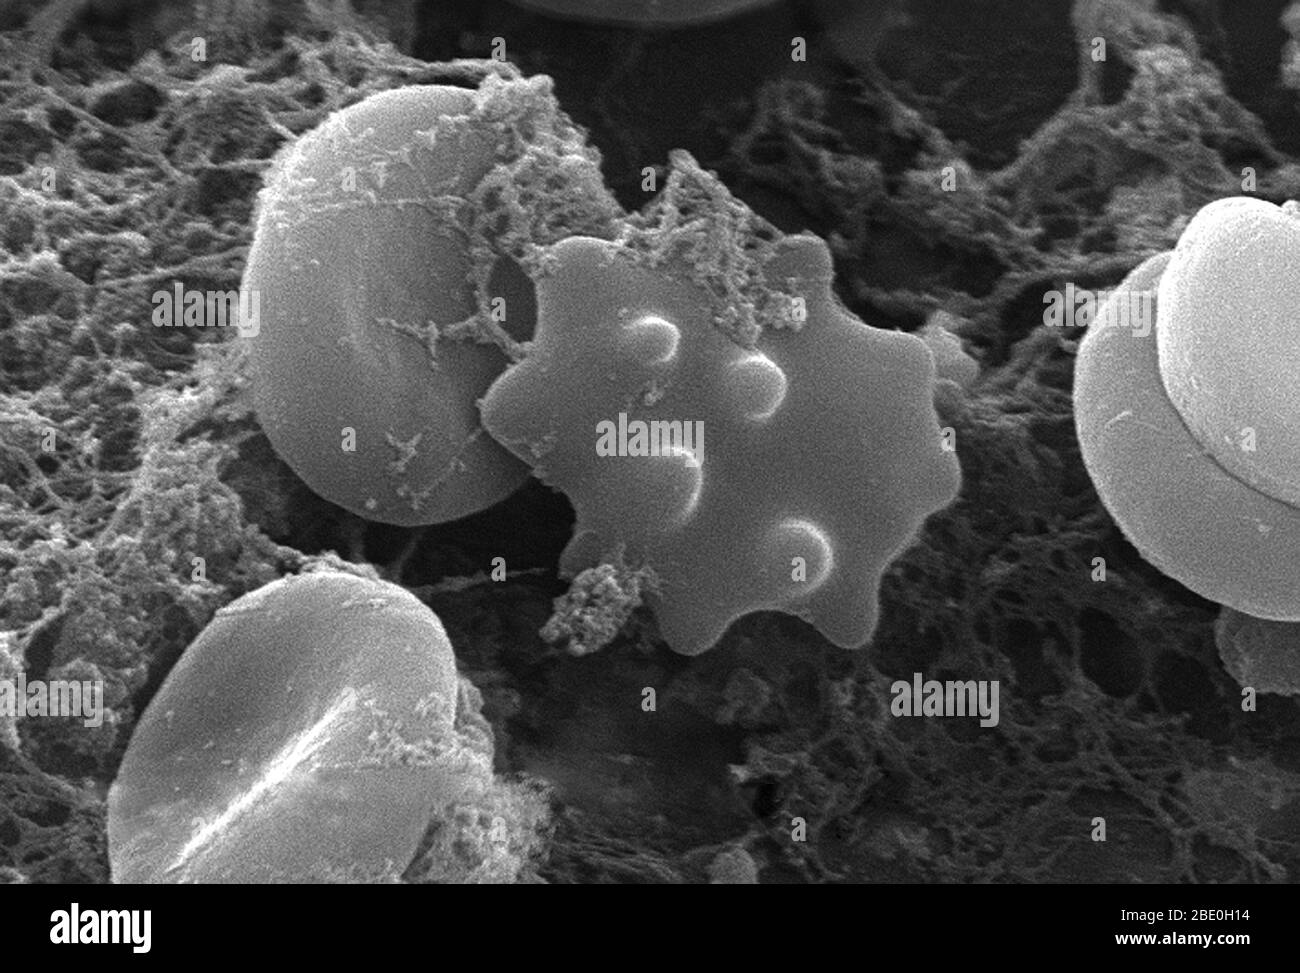 SEM depicting red blood cells found enmeshed in a fibrinous matrix on the luminal surface of an indwelling vascular. The erythrocyte in the center had undergone the process of crenation, whereupon, it developed a number of cell wall projections, thereby, transforming it into what is termed an acanthocyte. Acanthocytosis could be indicative of a number of hematologic disease processes, but in this instance, was probably due to the fixation procedure carried out on this specimen prior to electron micrographic viewing. Note the normally appearing, biconcave cytomorphologic shape of the other eryt Stock Photo